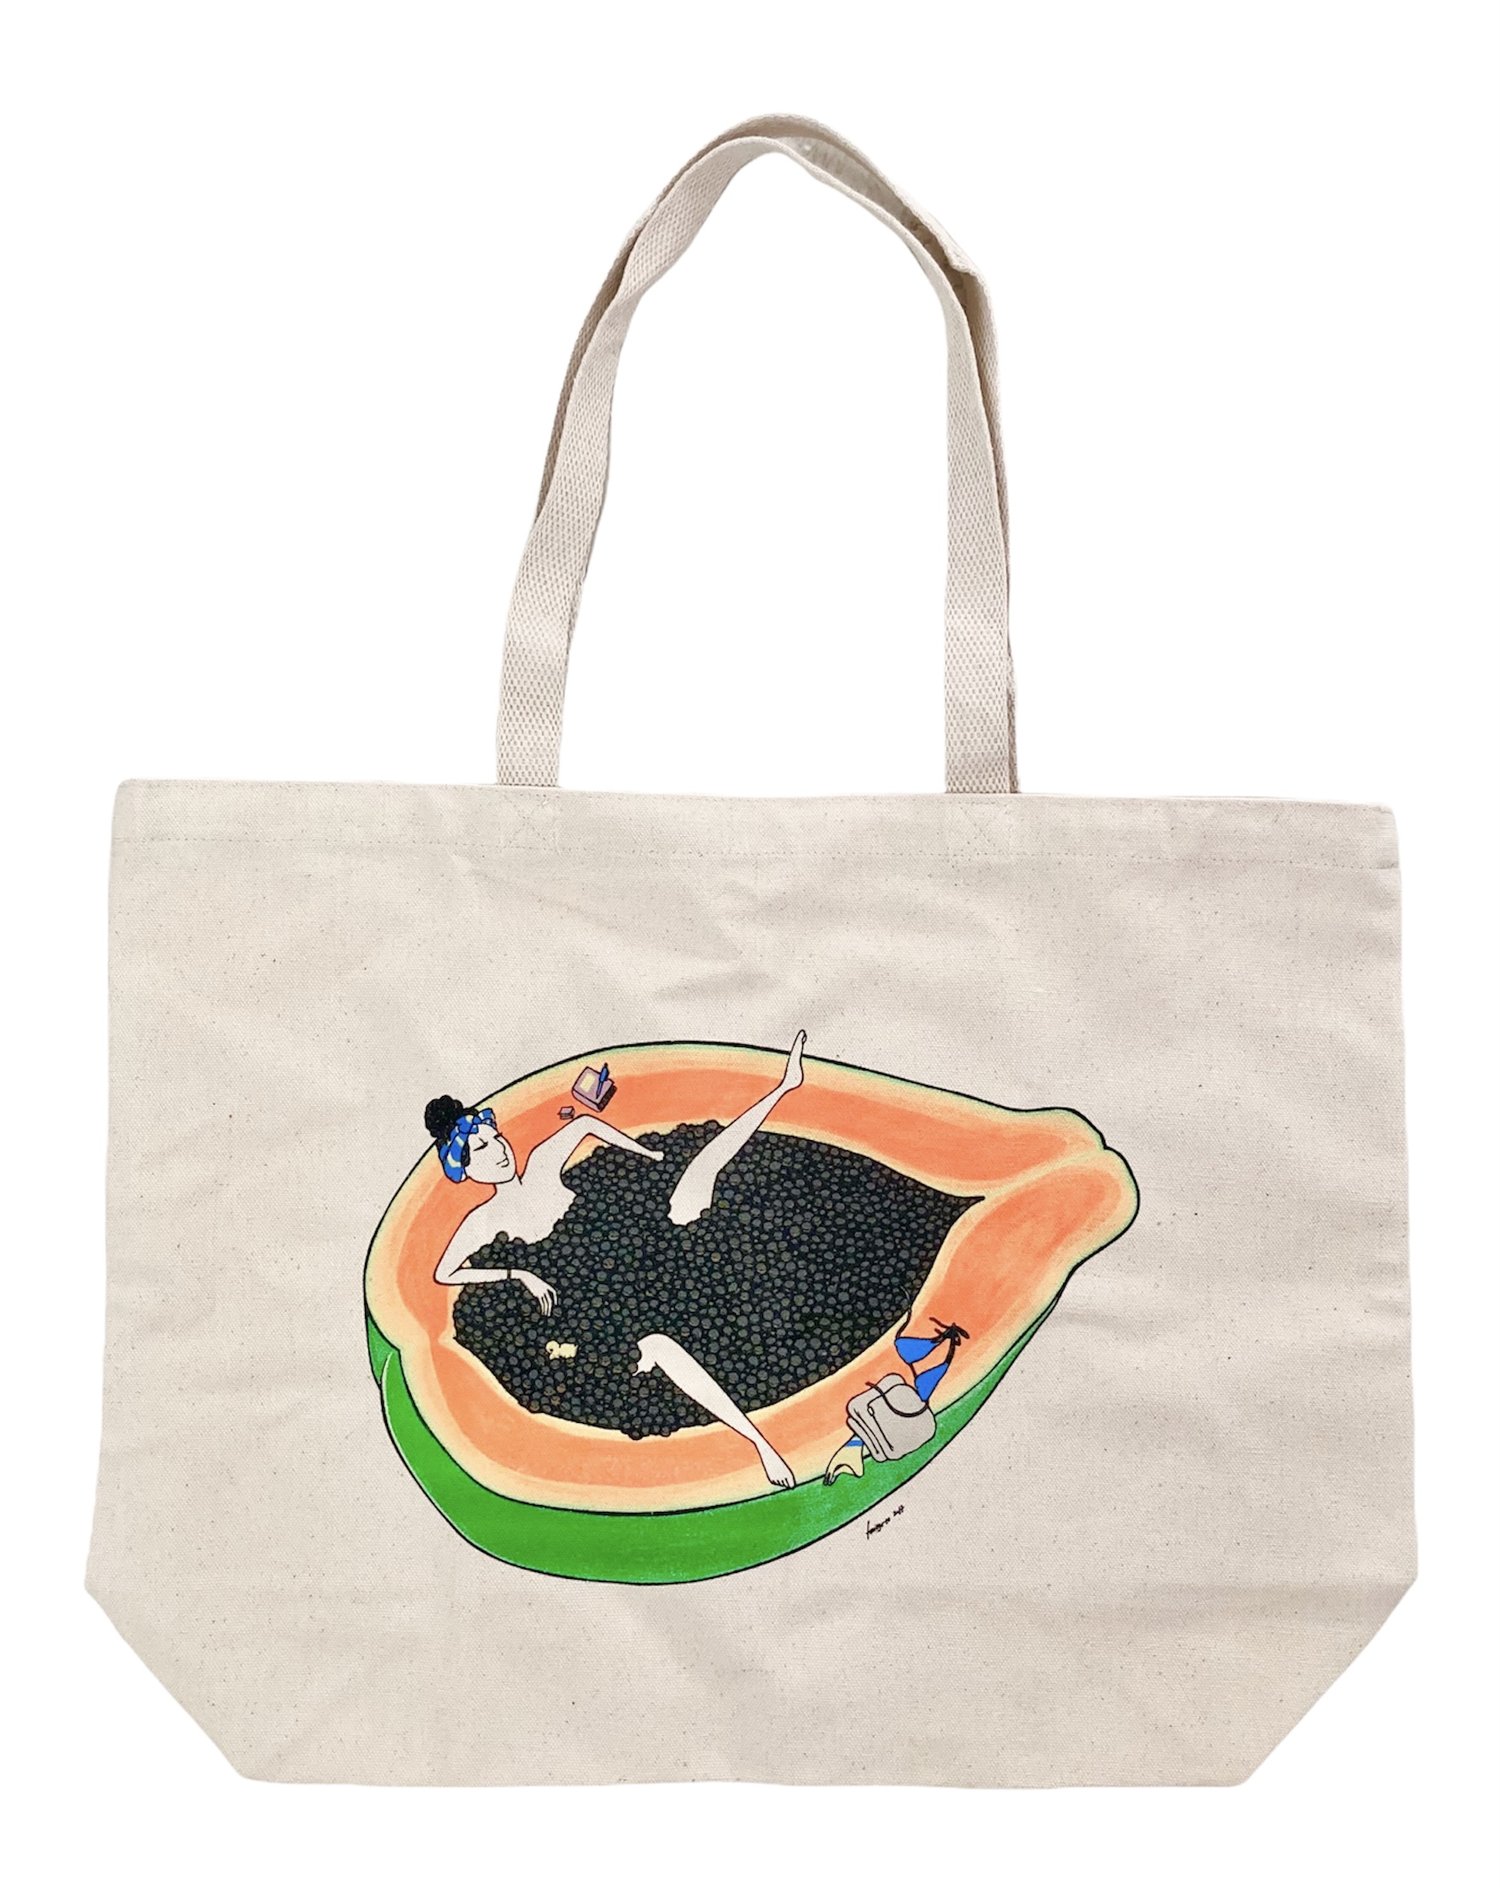 Unique Handmade tote Bags ALL PROCEEDS Will Go to 